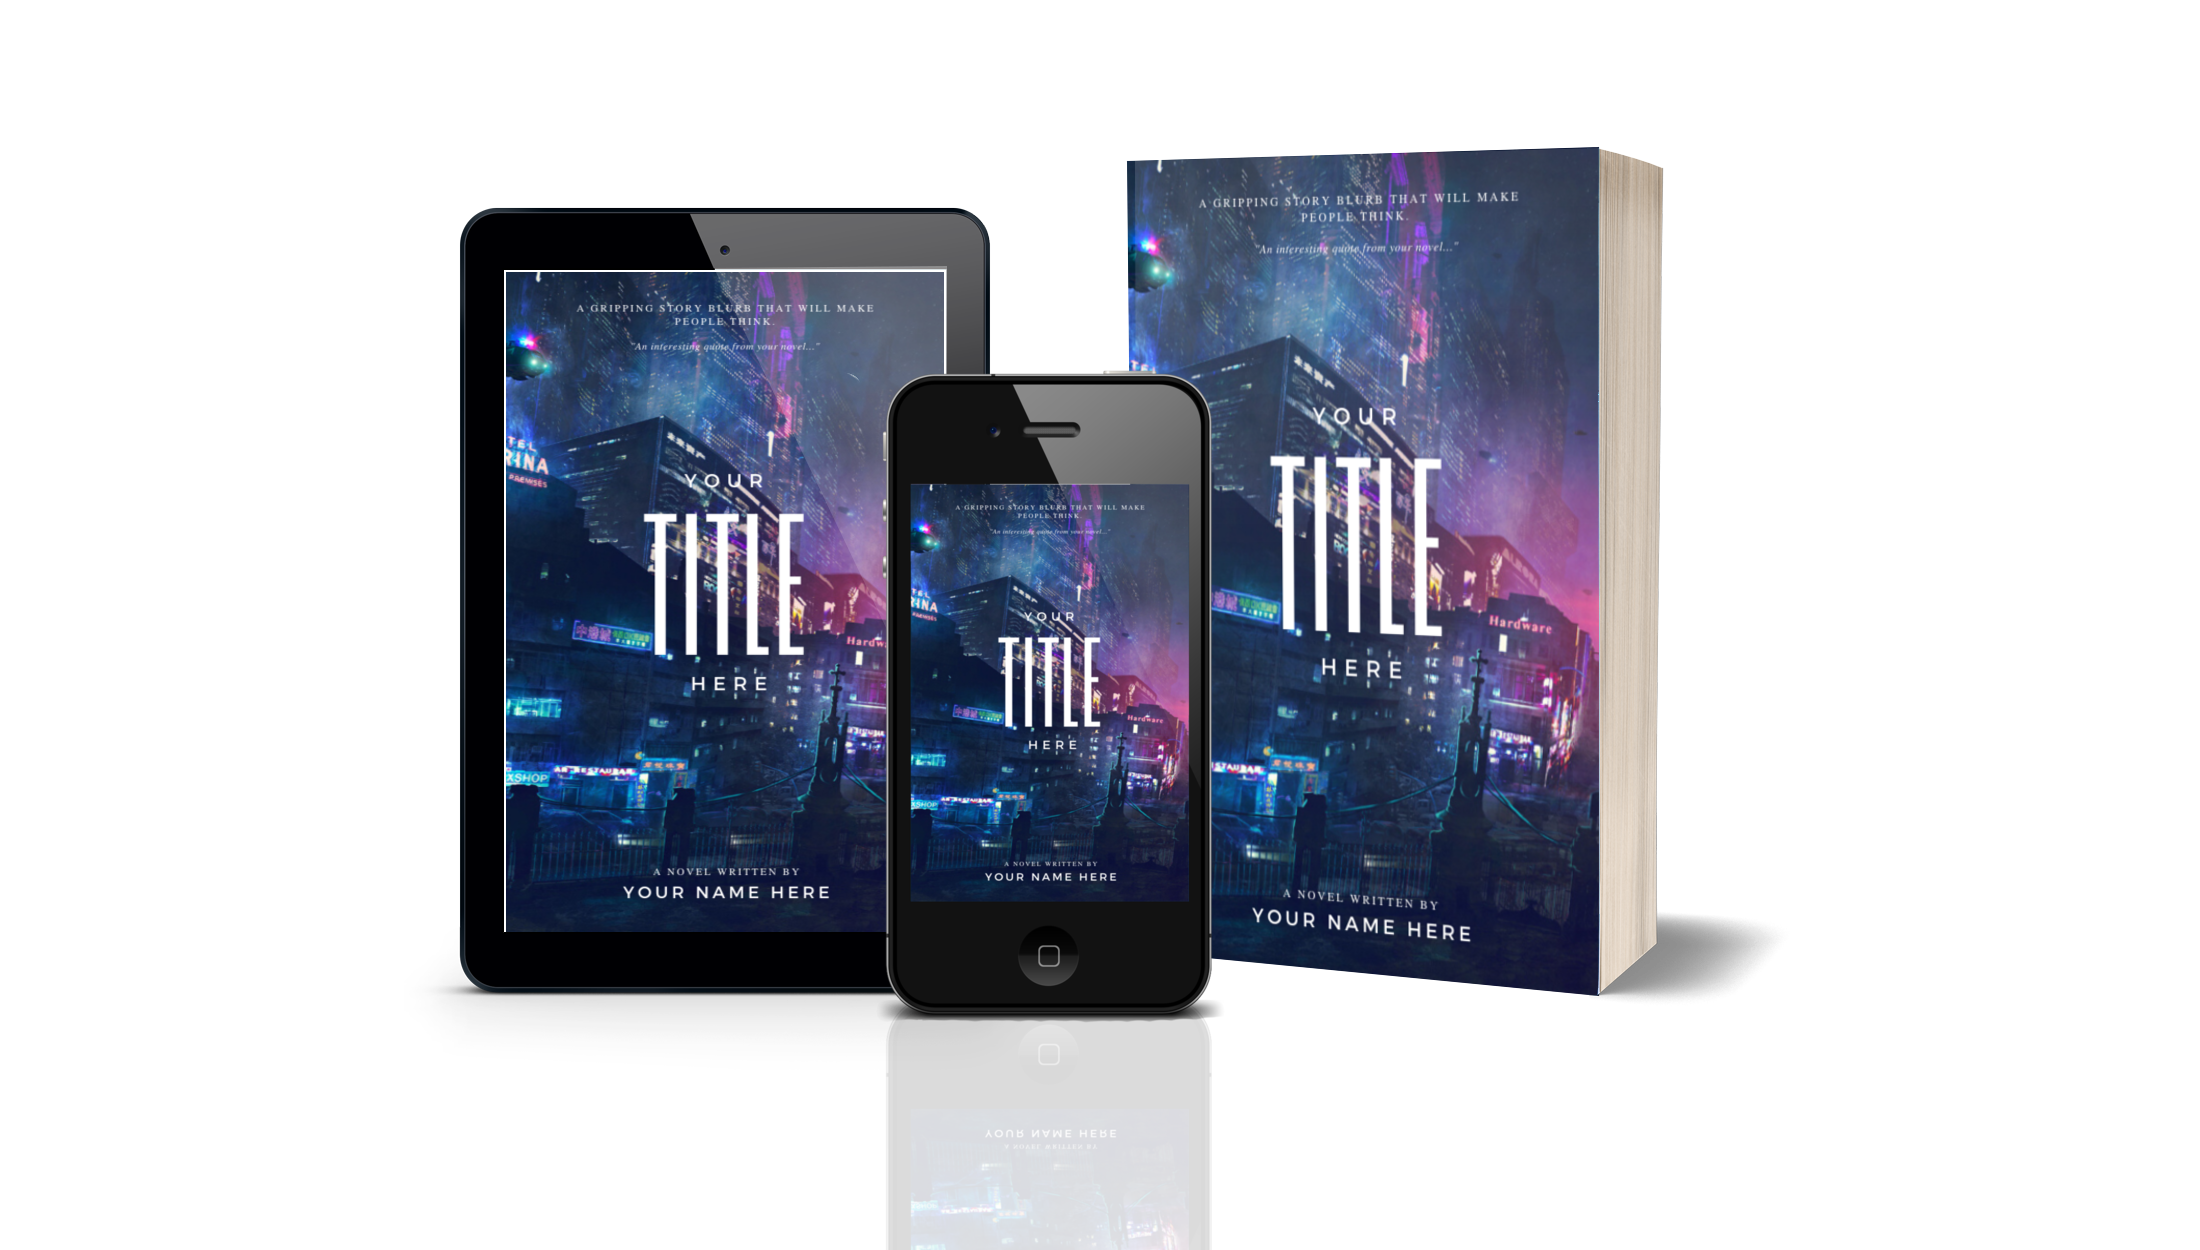 A mocked up 3D book cover showing a paperback, a phone and a kindle with a book cover which says Your Book Title Here on a cyberpunk style cityscape background.